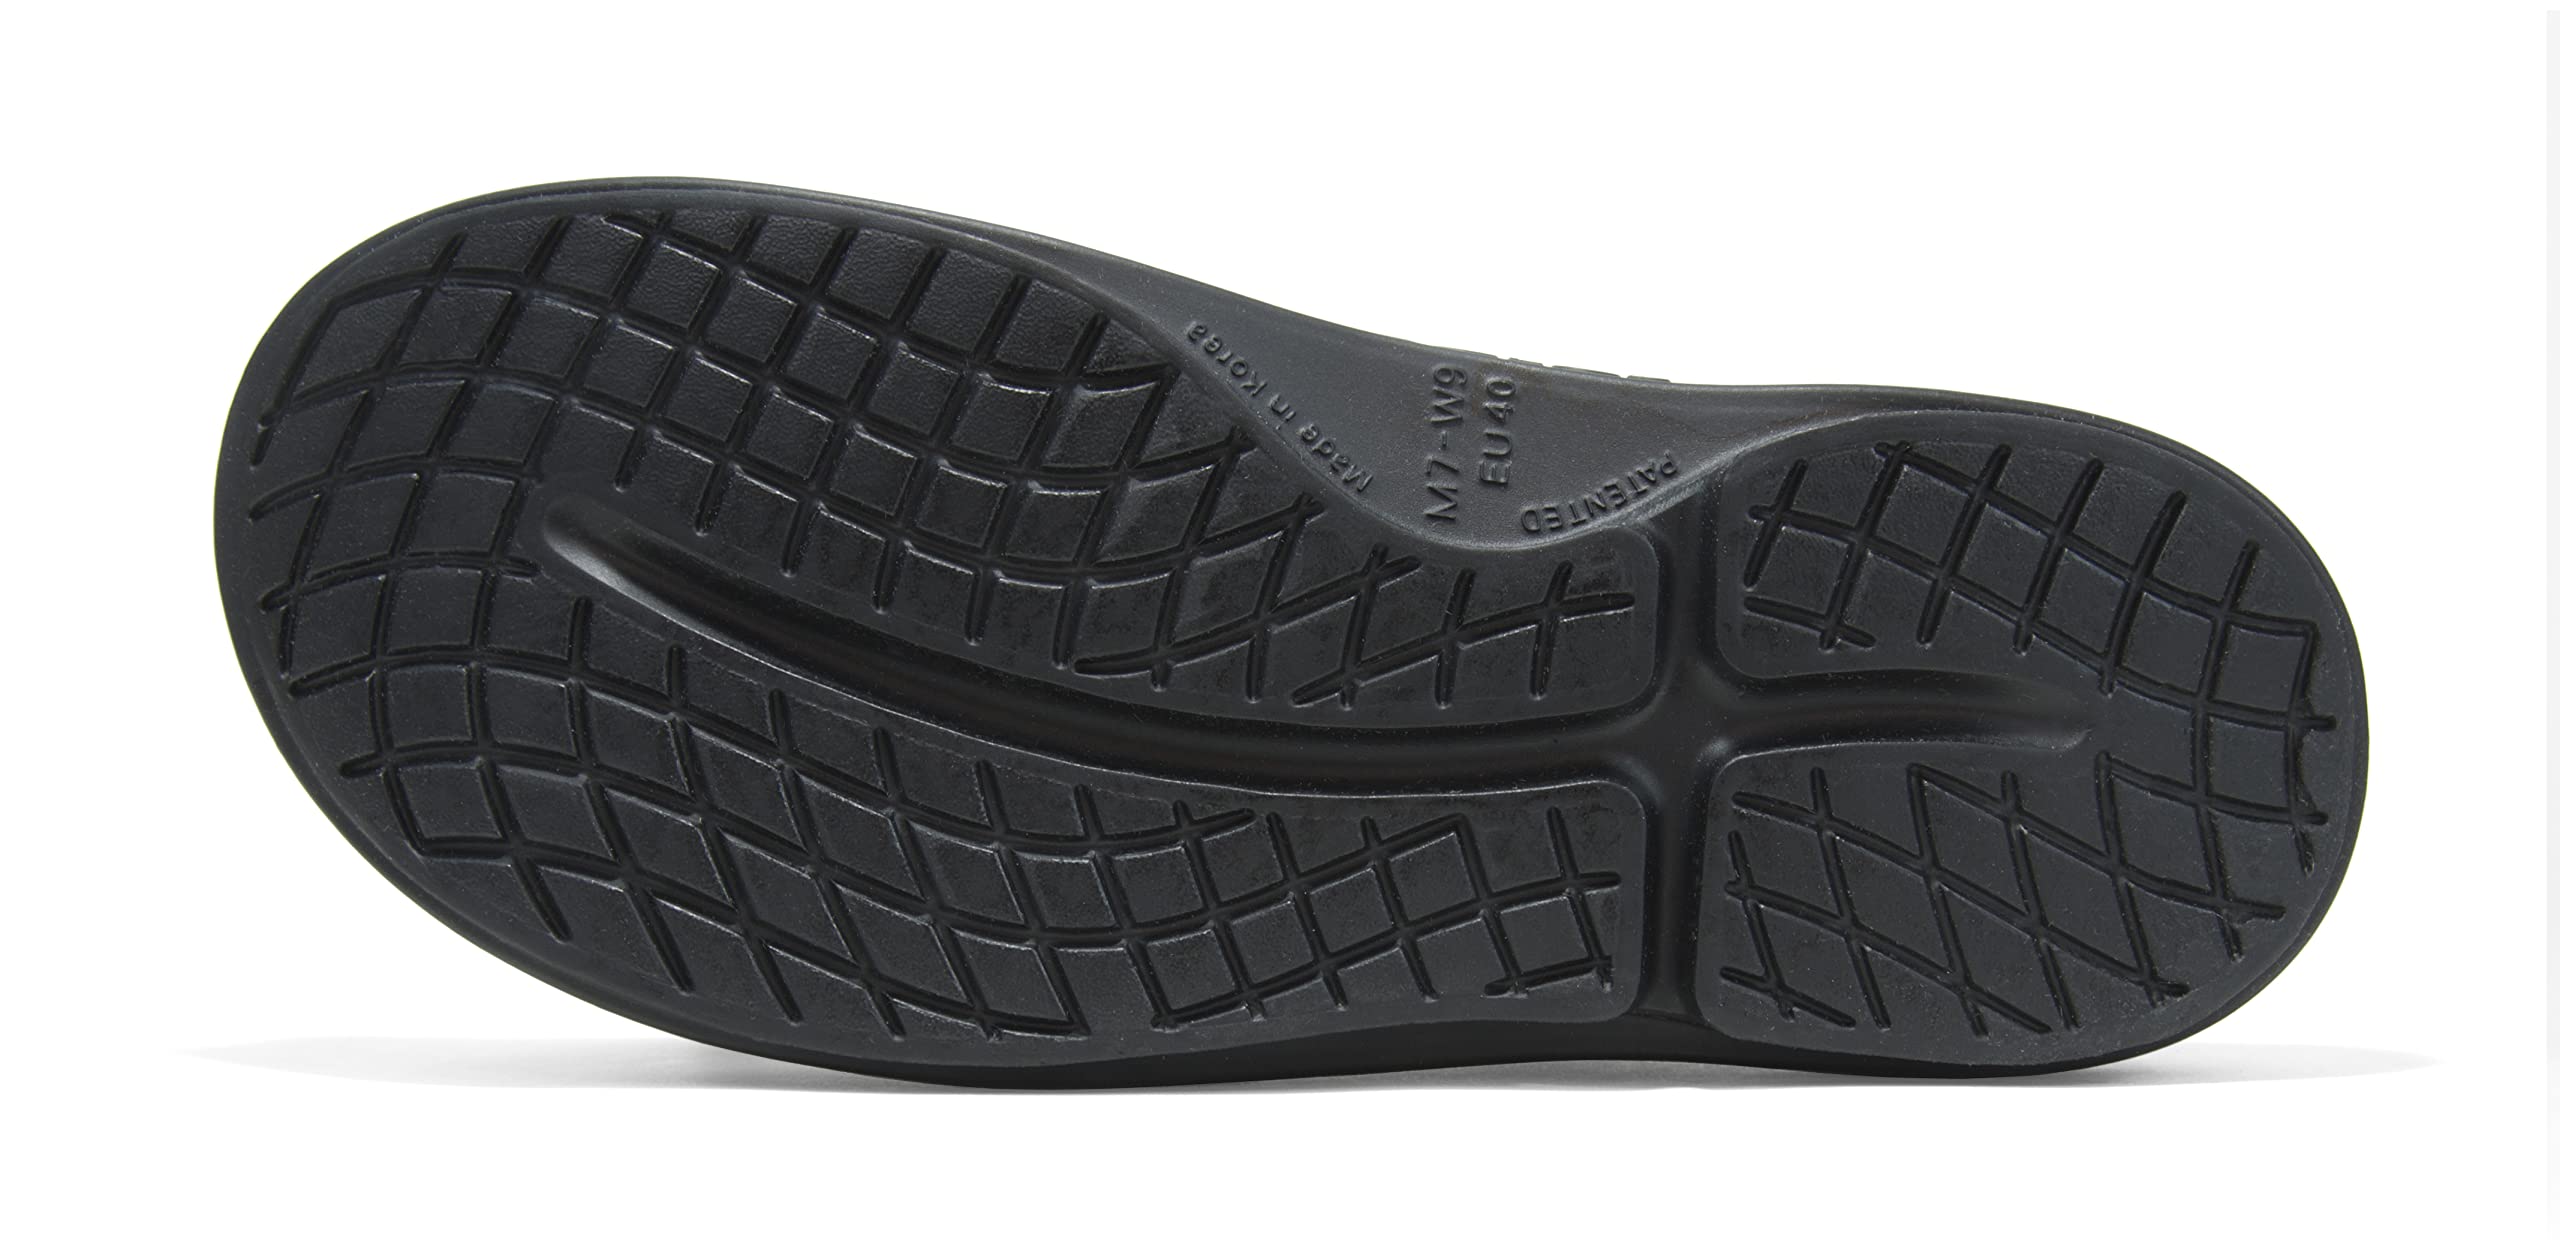 OOFOS OOcloog - Lightweight Recovery Footwear - Reduces Pressure on Feet, Joints & Back - Machine Washable